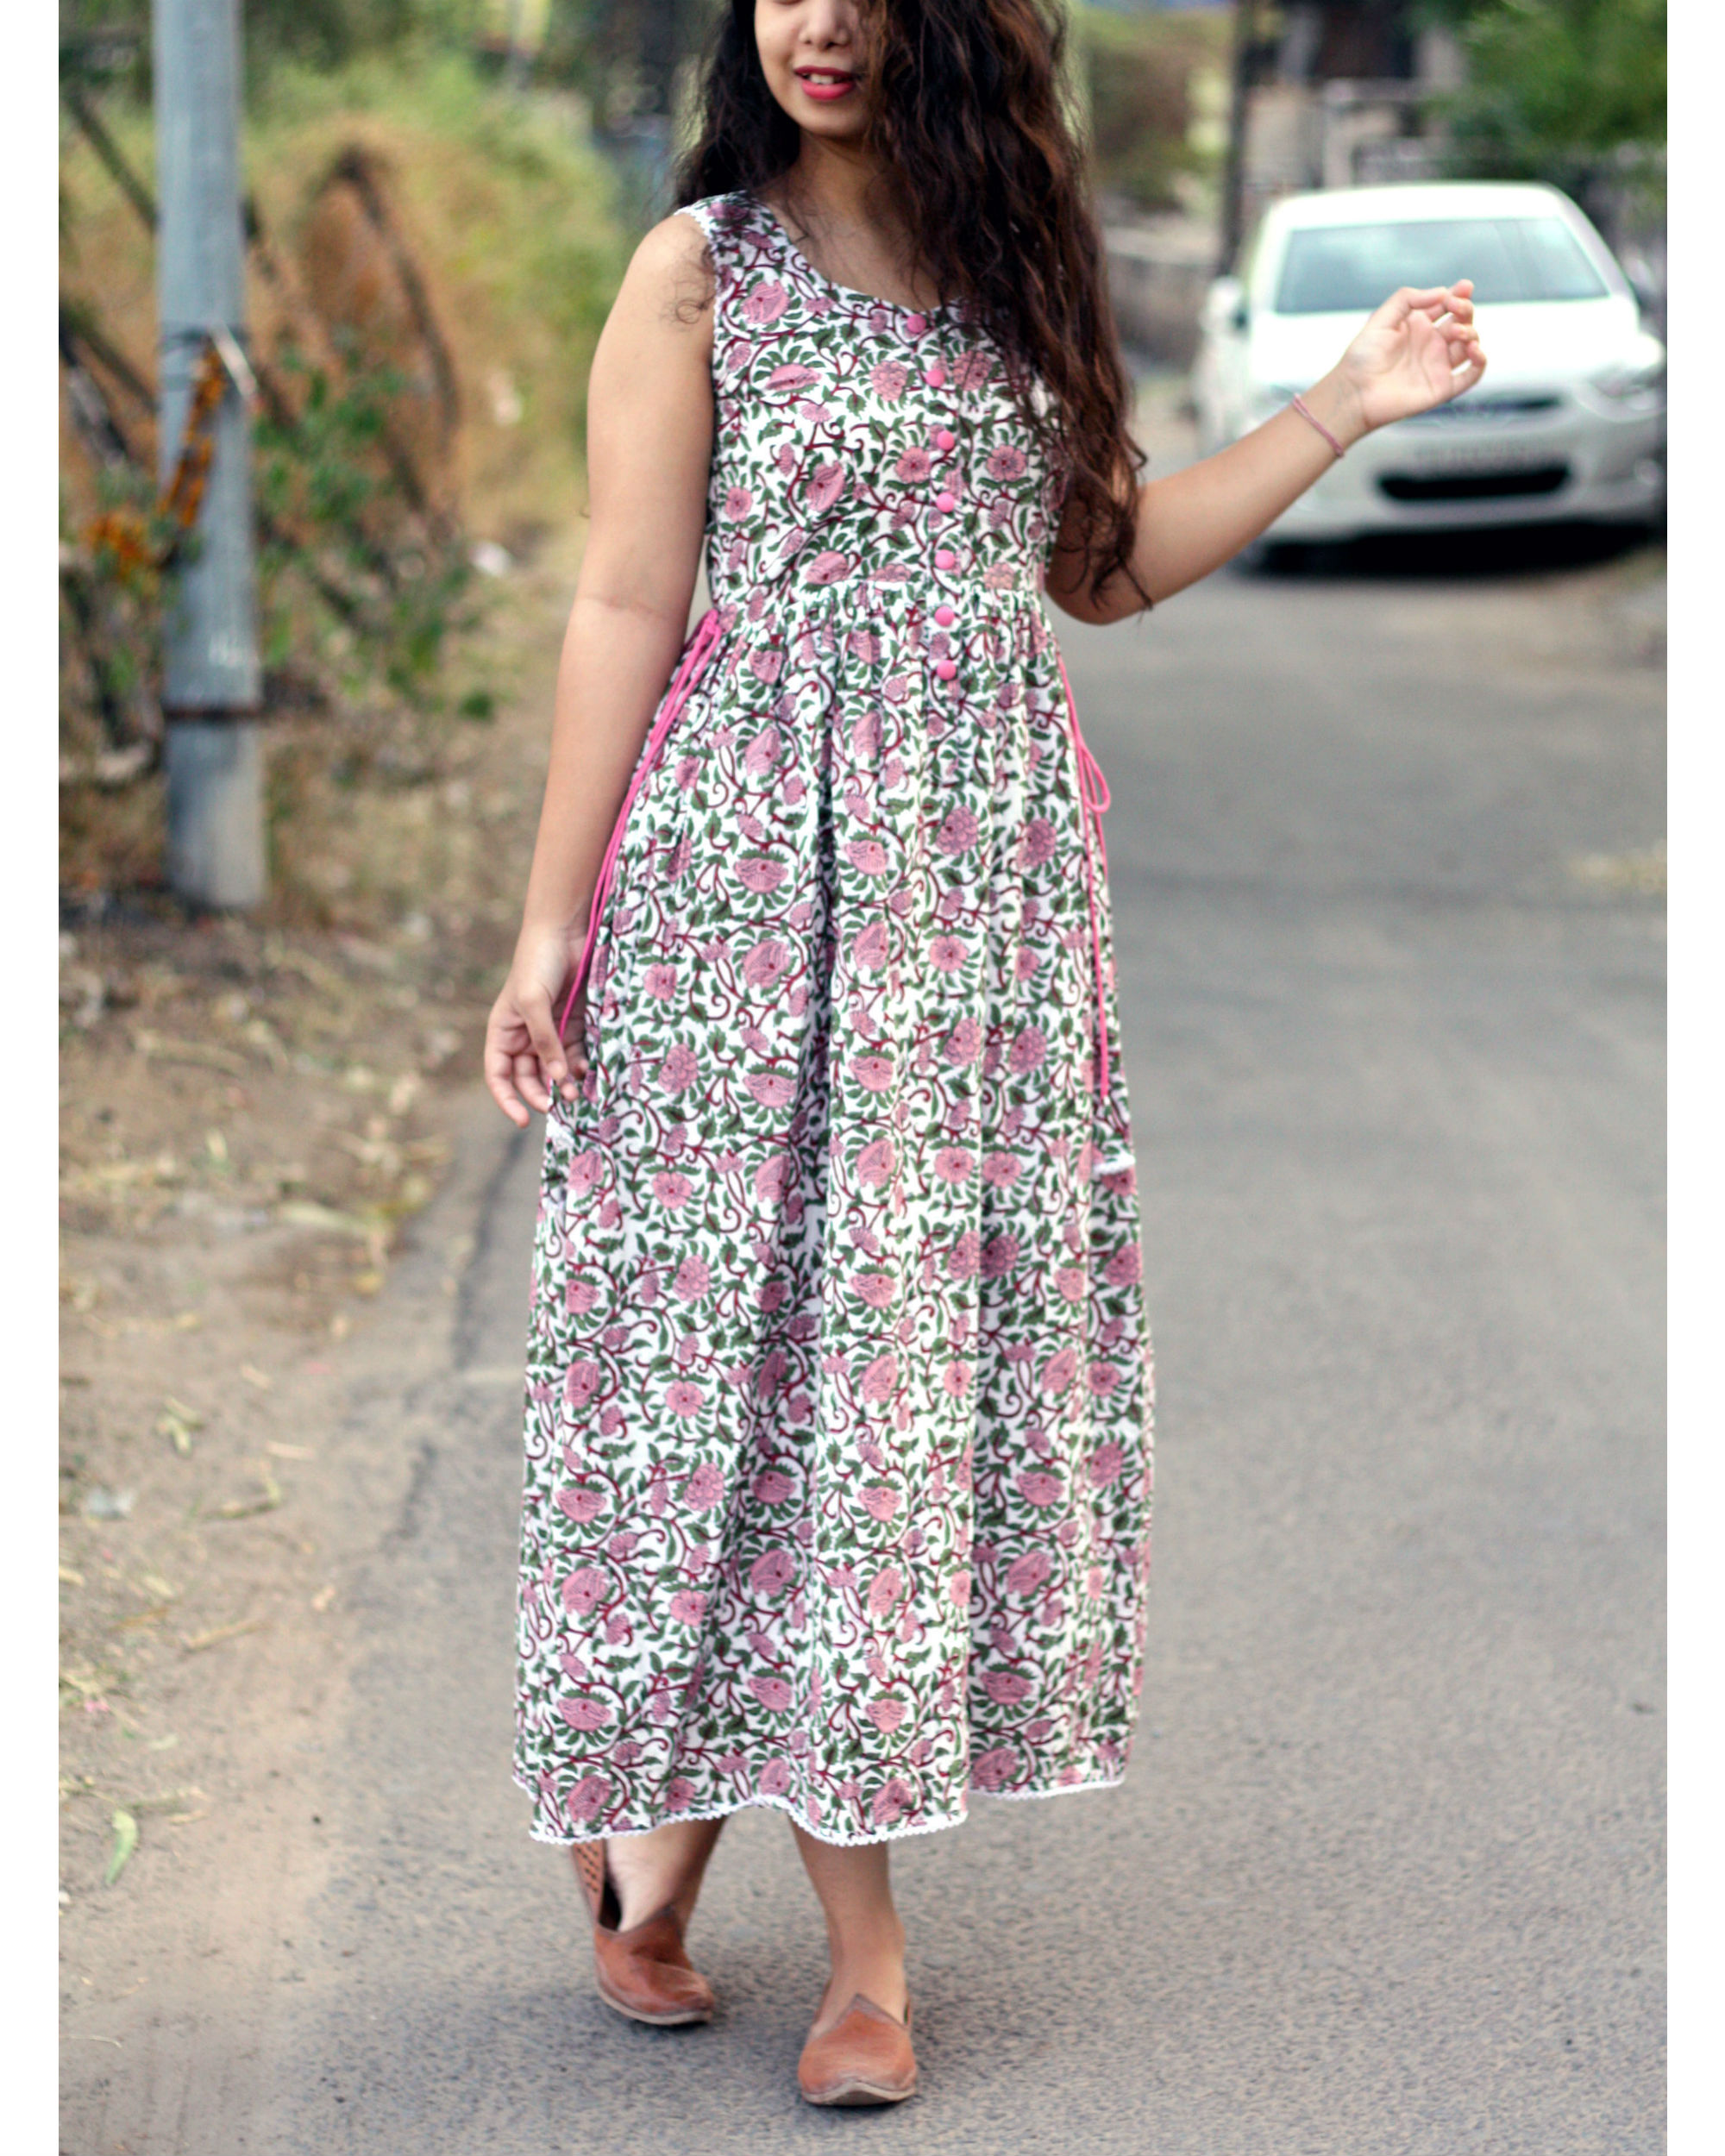 Floral ankle length maxi dress by Label ...